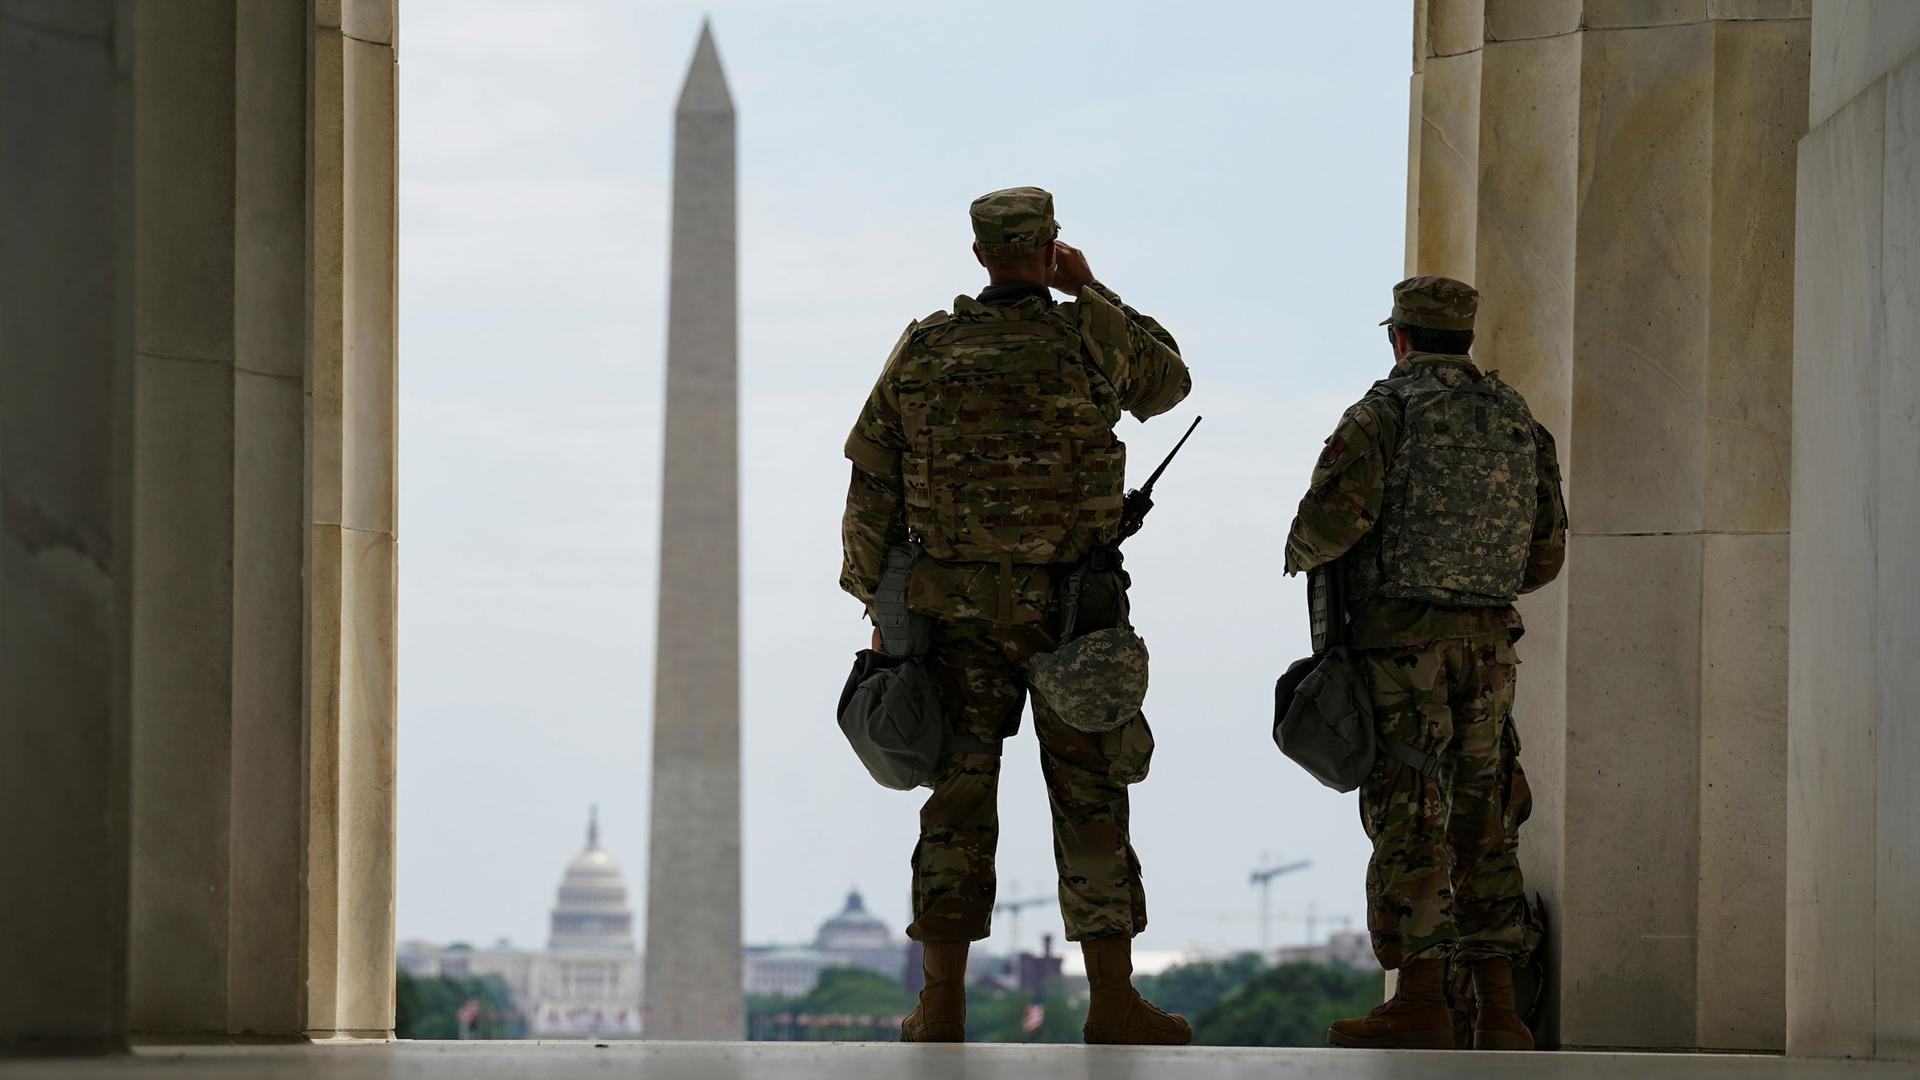 Two US soldiers are shown looking out at the Washington Monument with the US Capitol Building off in the distance.